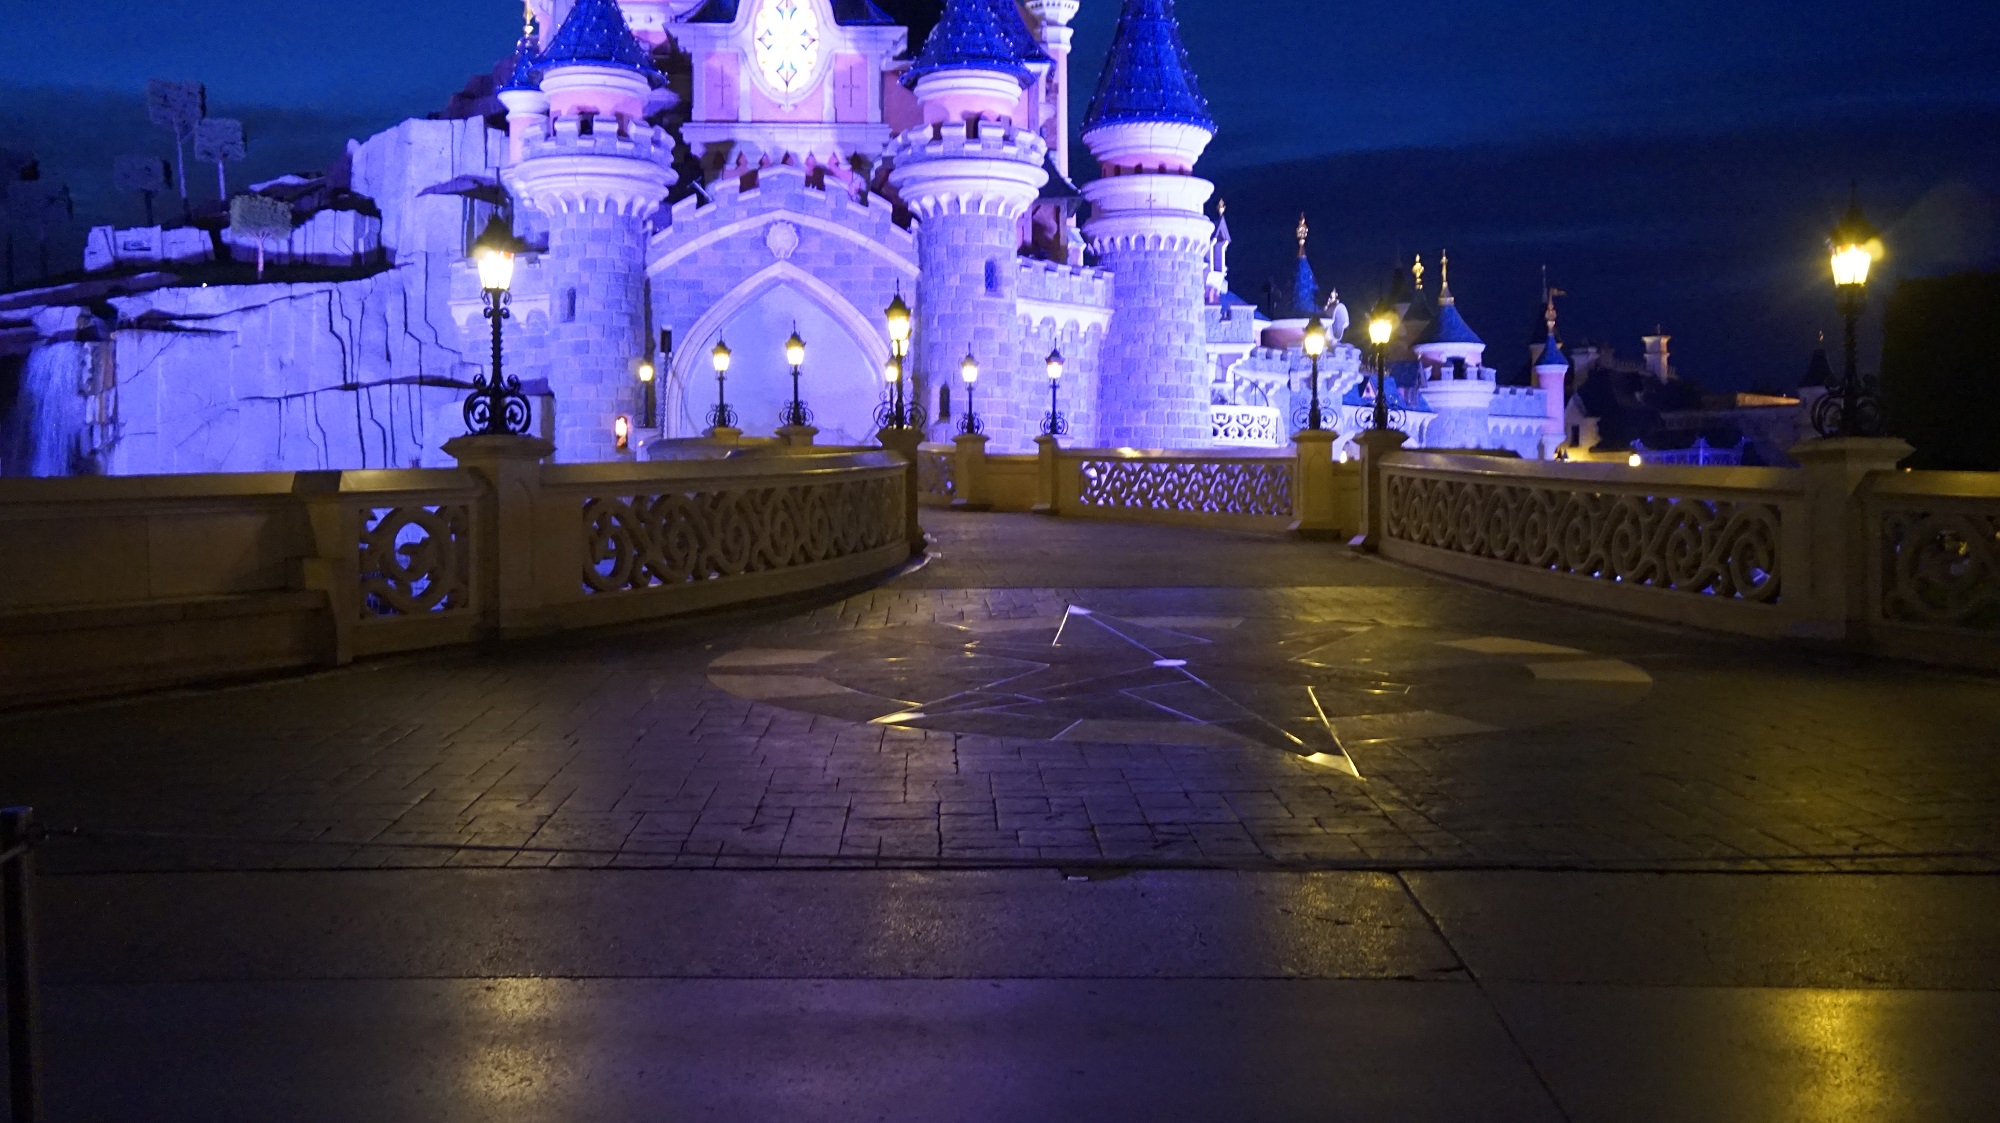 Read the magical story of a very special marriage proposal at Disneyland Paris |PassPorter.com